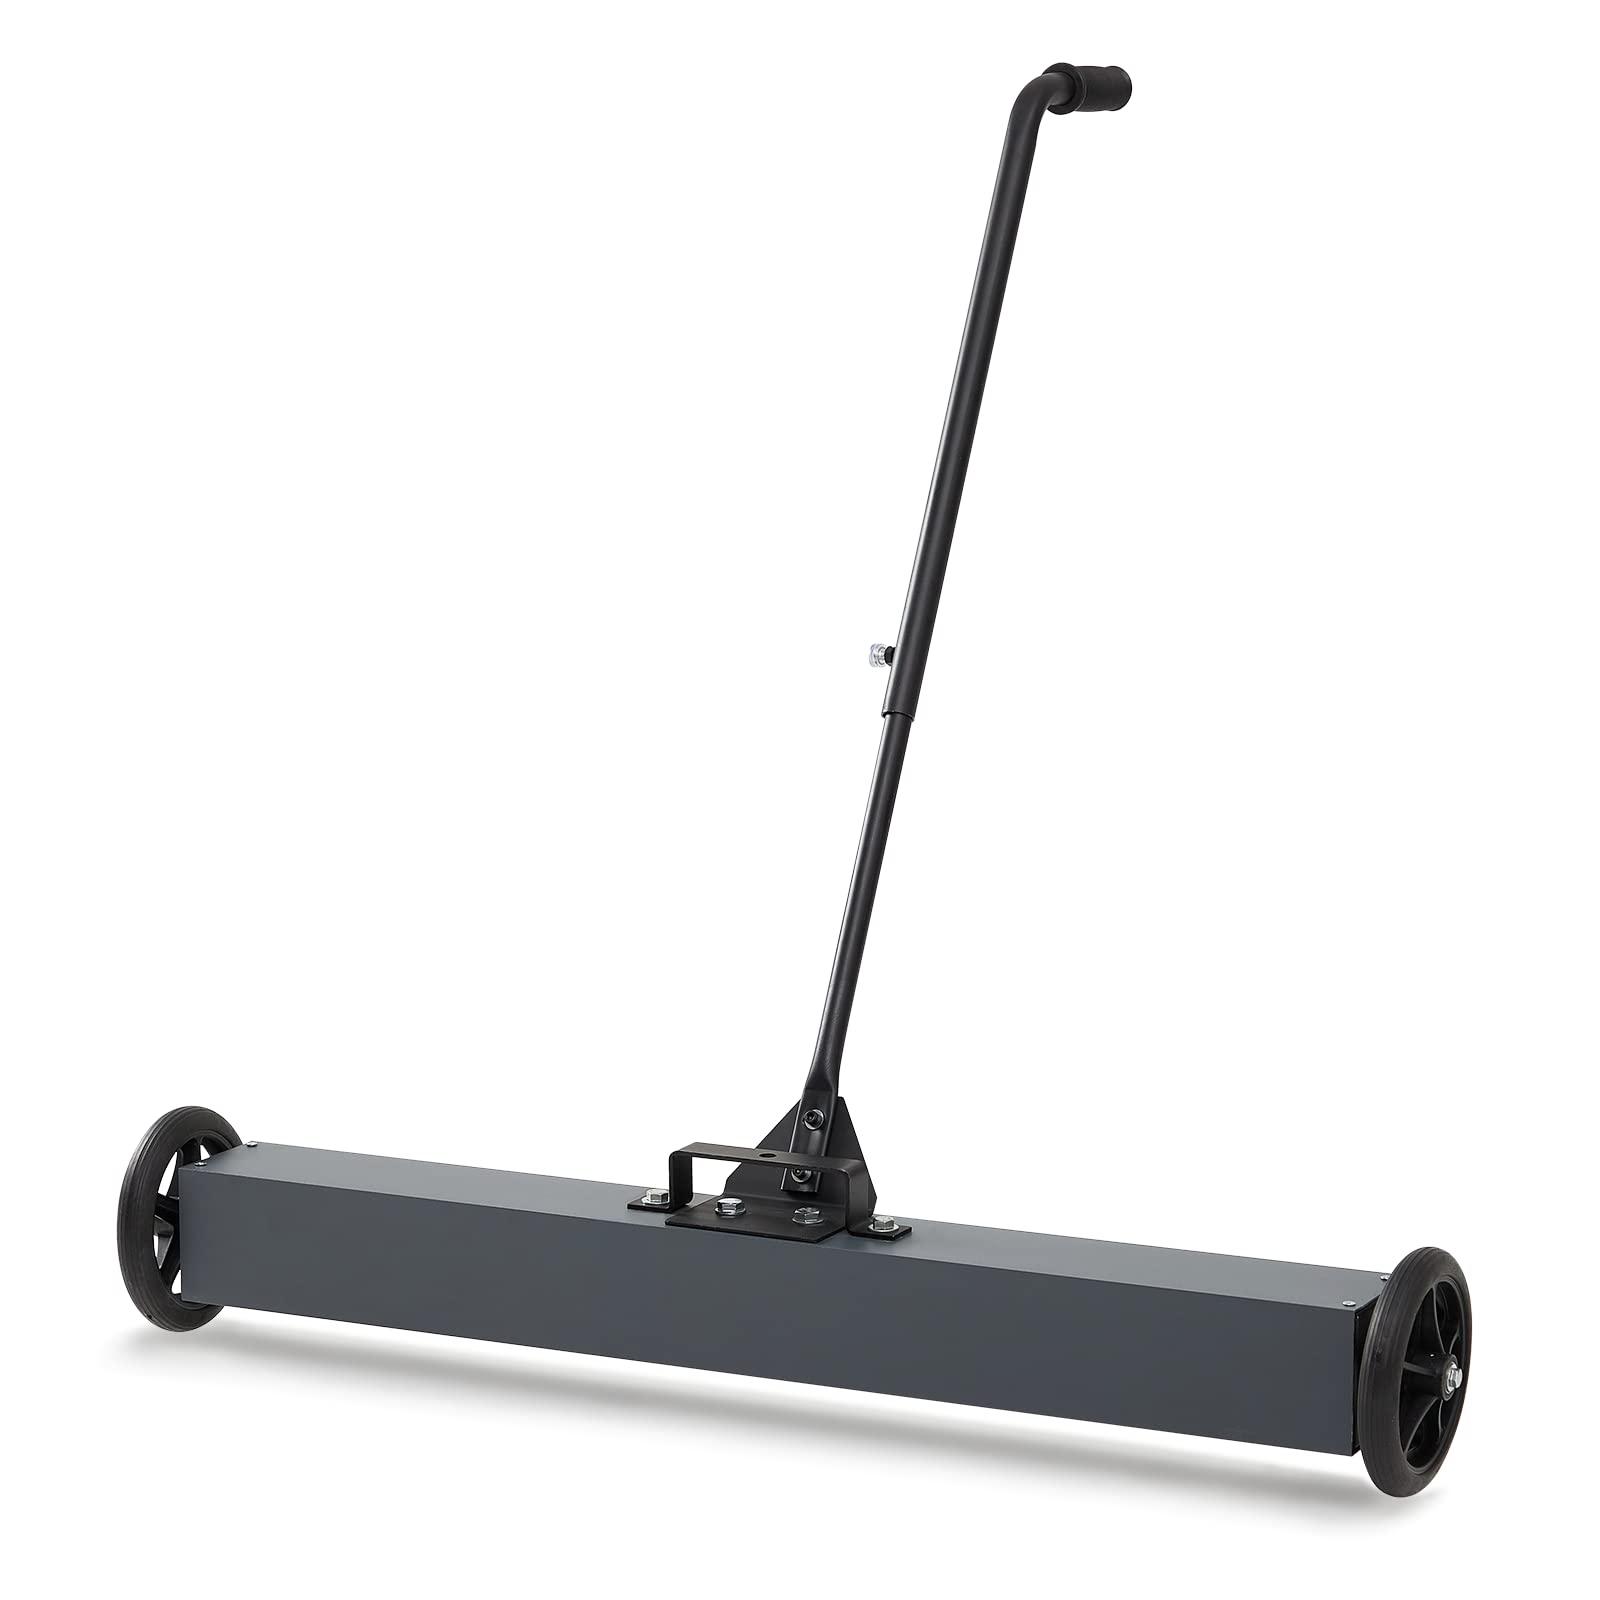 towallmark 24-inch magnetic sweeper with wheels, rolling magnetic sweeper quick release latch & adjustable long handle, magne